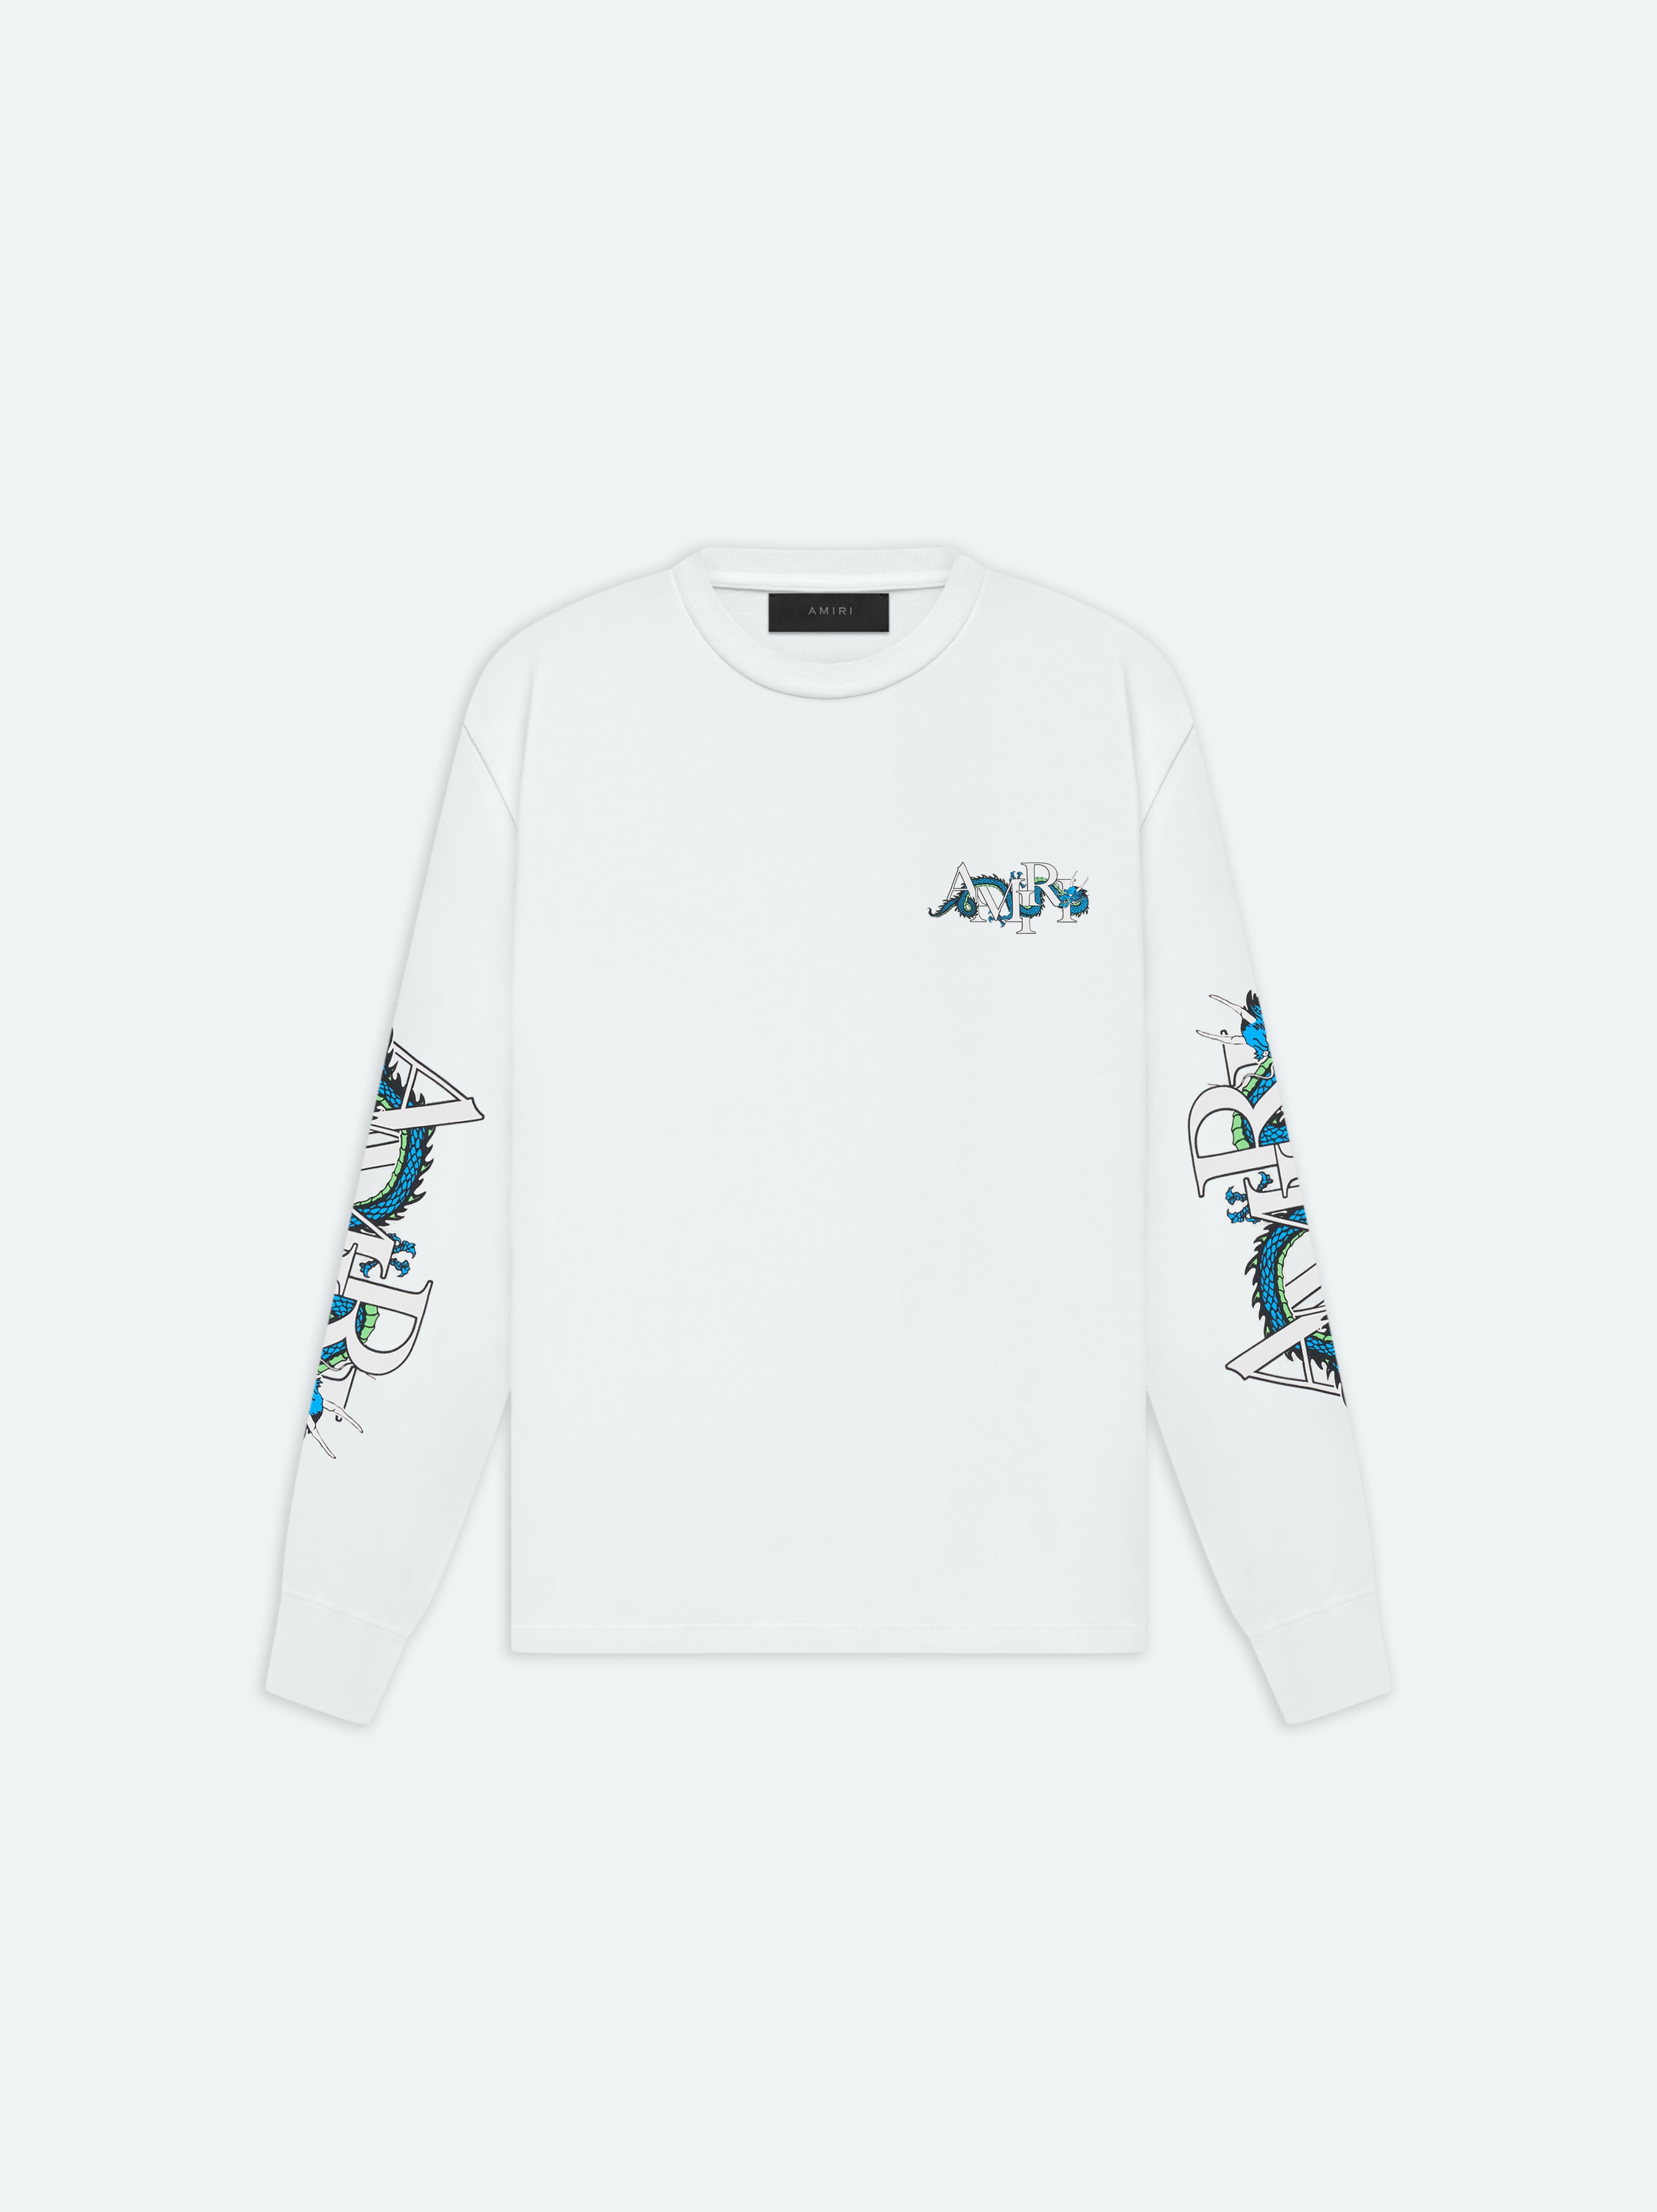 Product LUNAR NEW YEAR DRAGON LONG SLEEVE TEE - White featured image